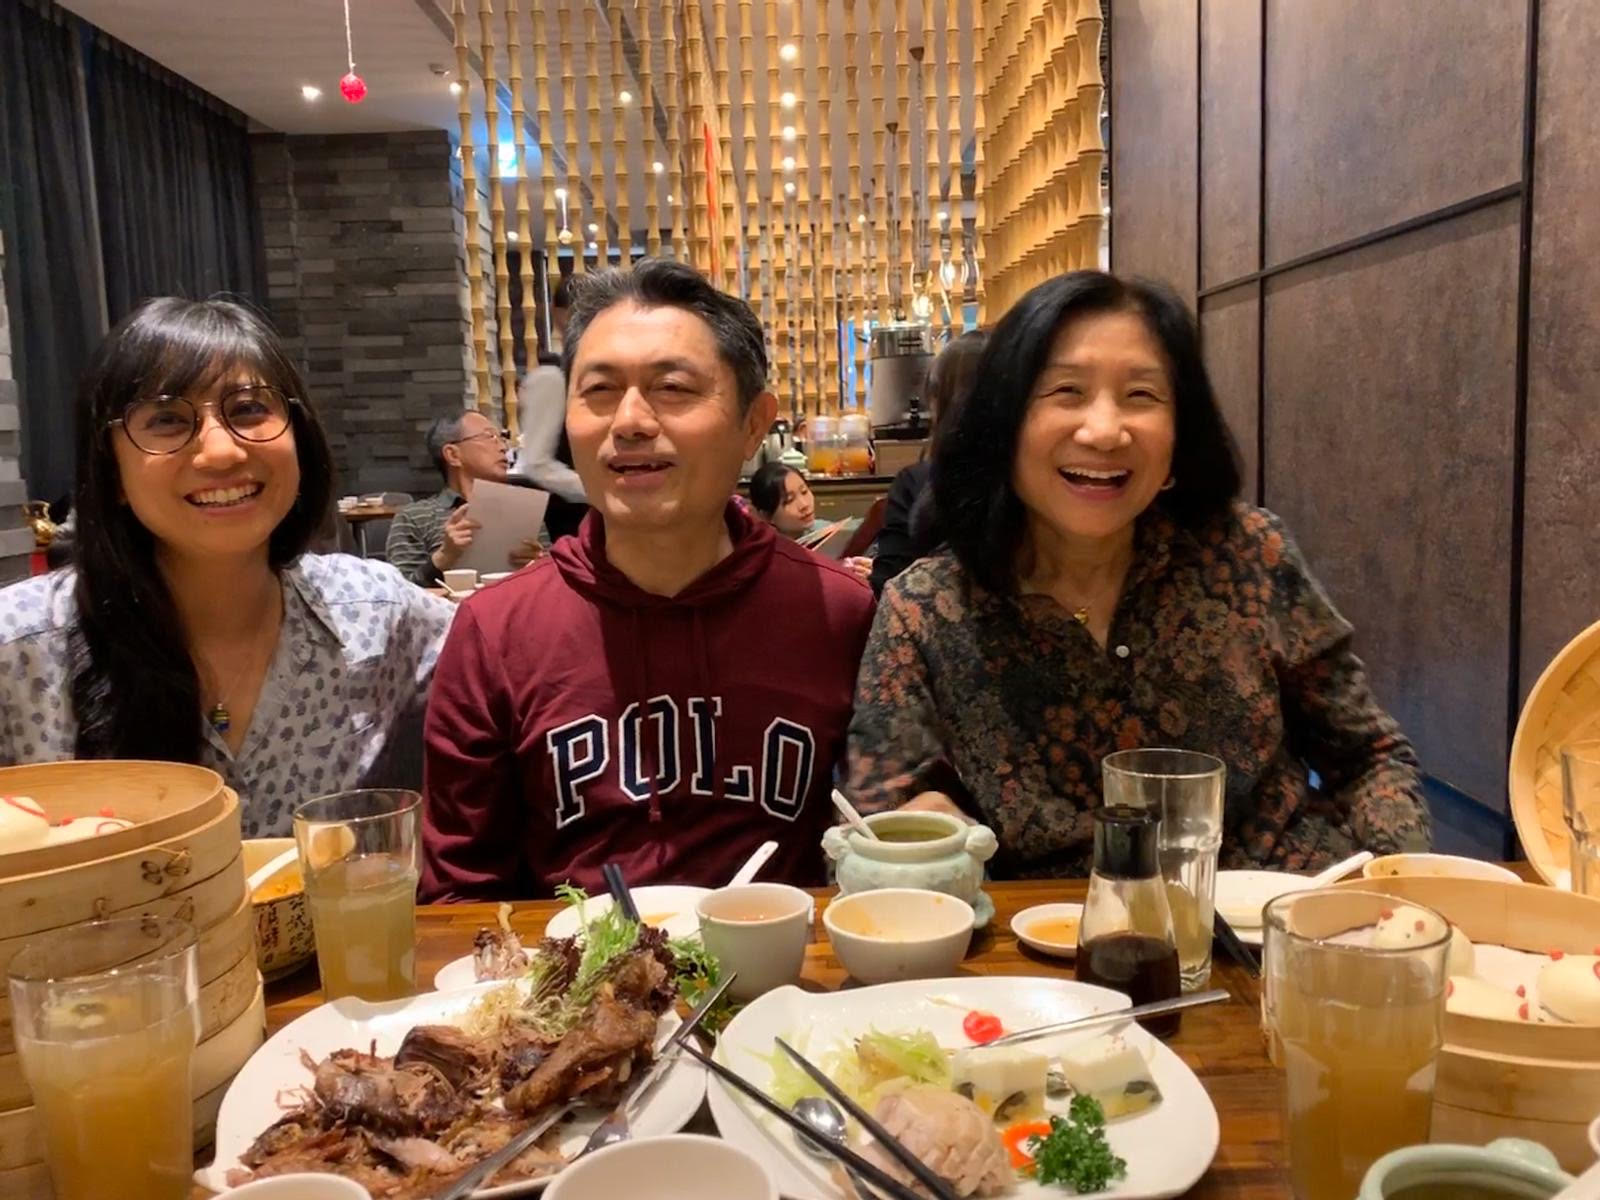 Dr. Nien-Tsu Shen '76 MA and Her Family